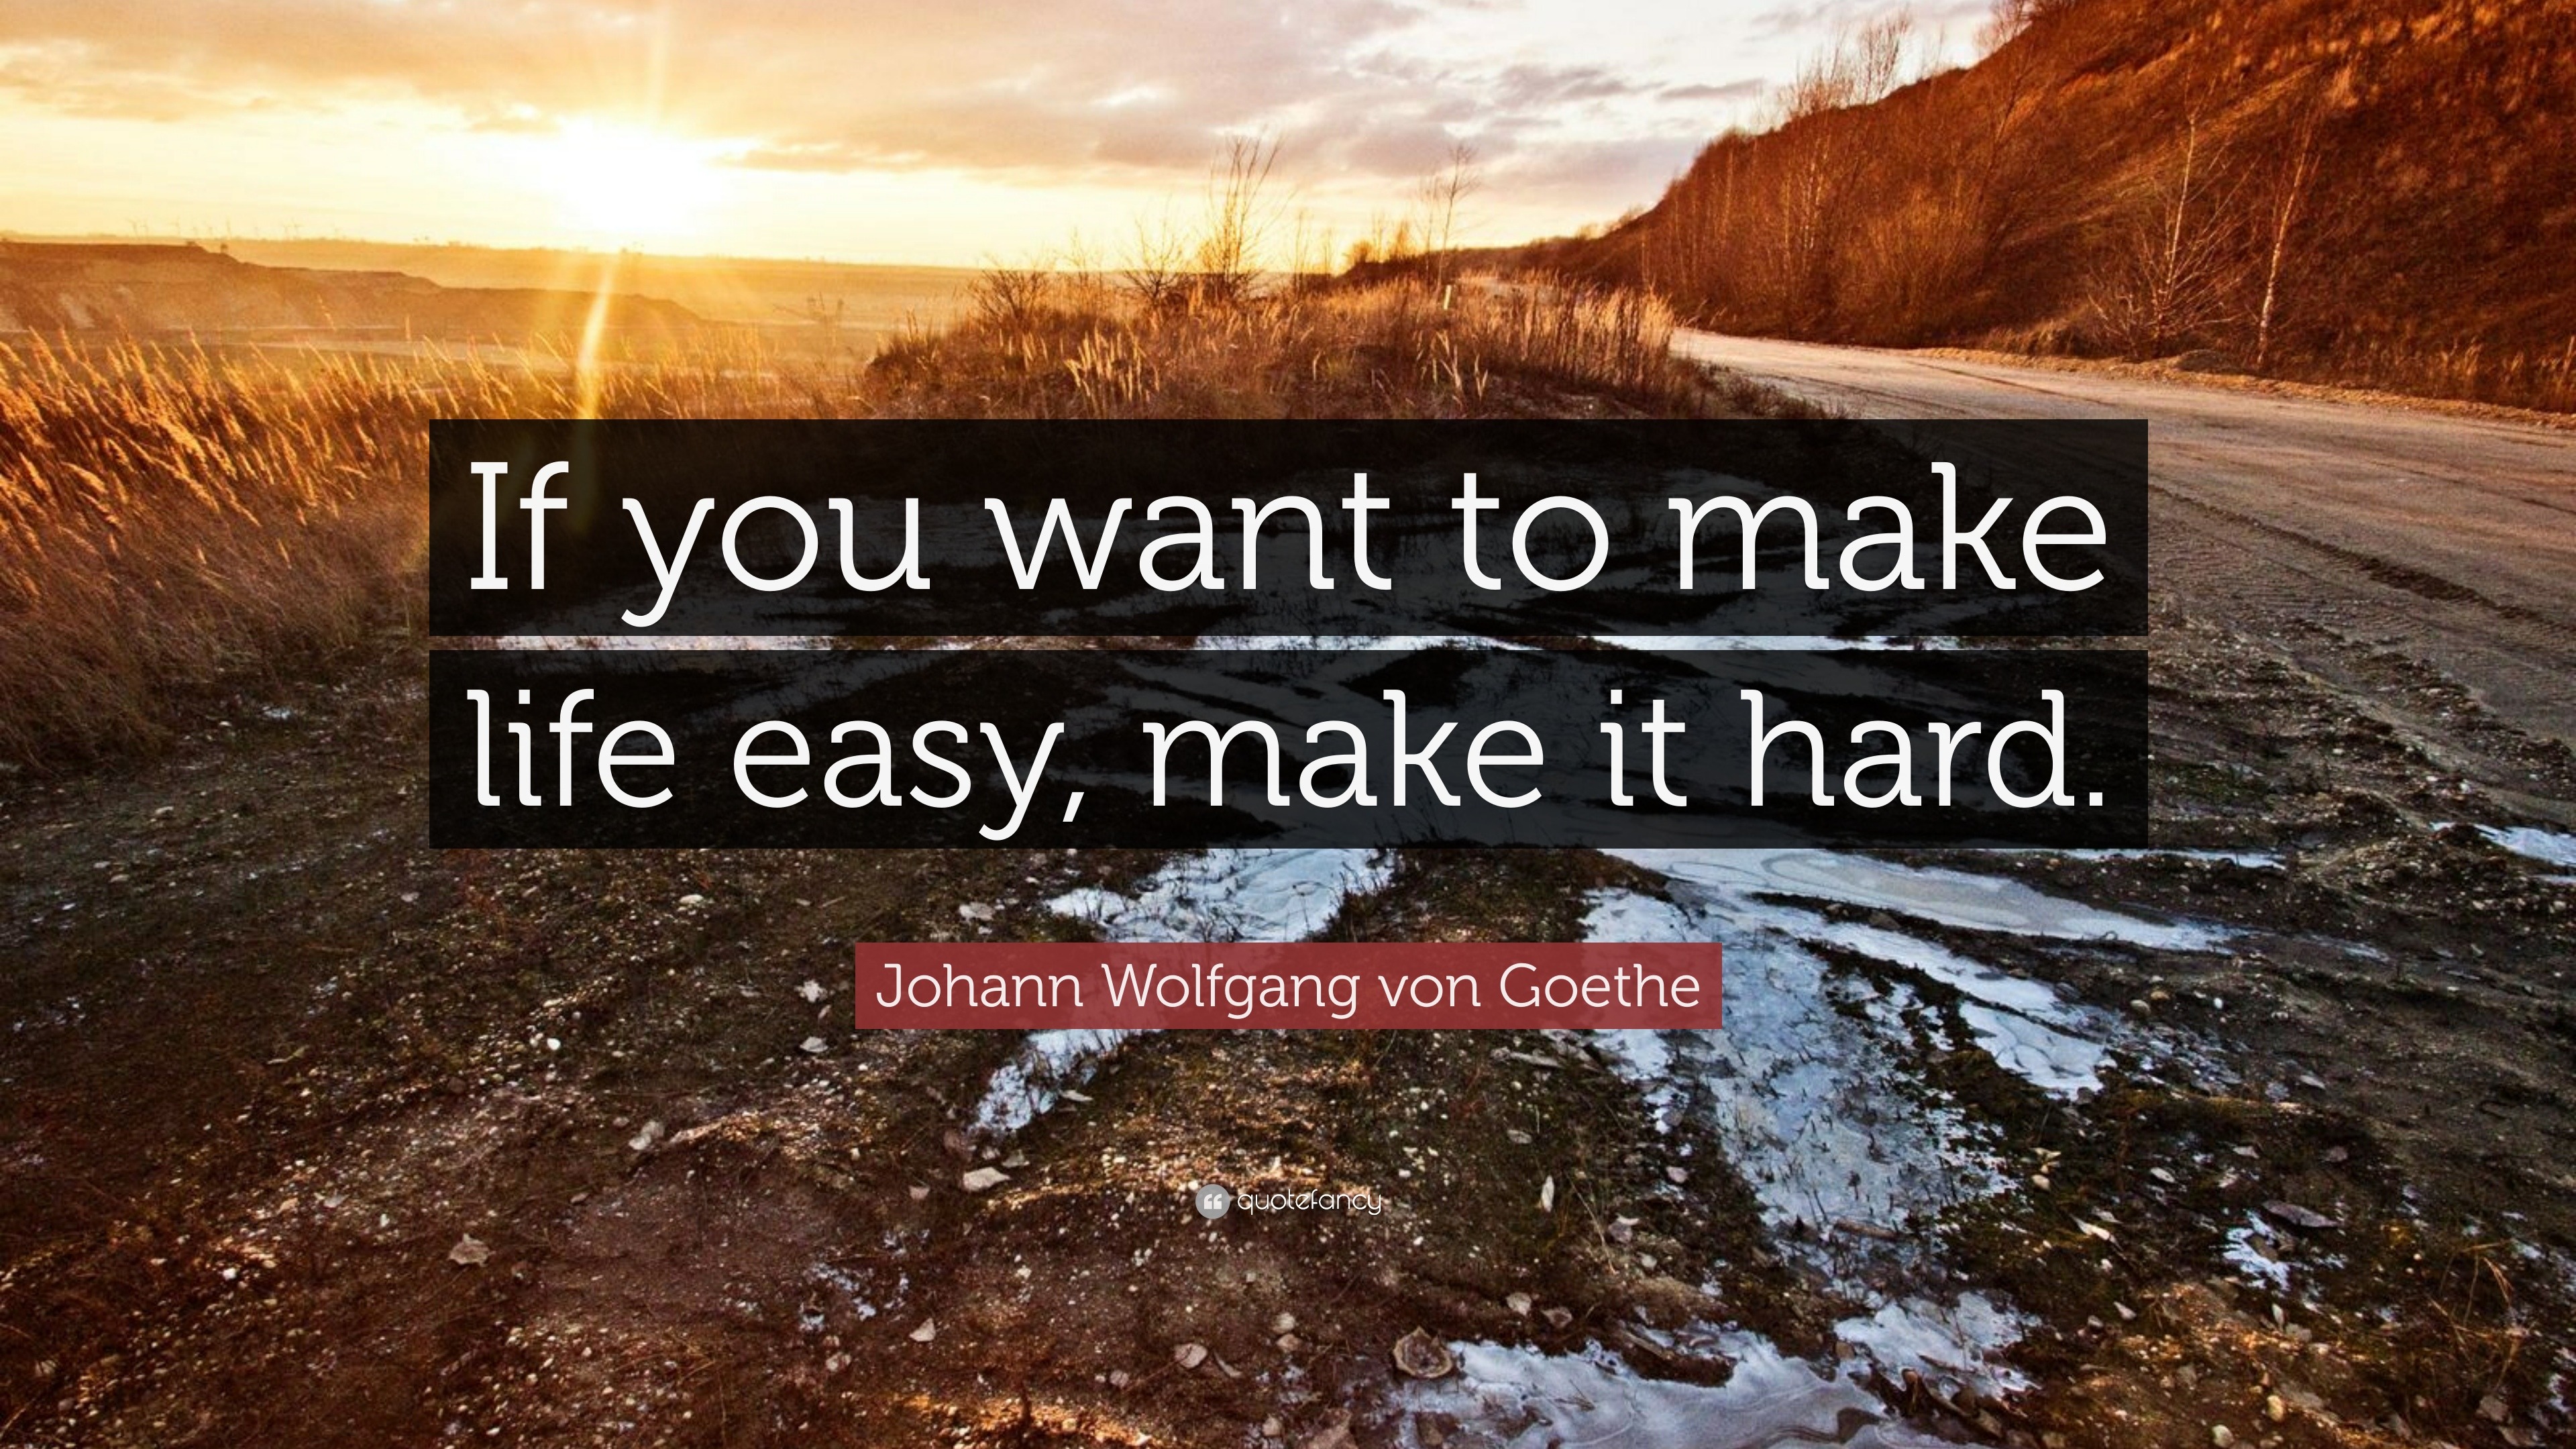 https://quotefancy.com/media/wallpaper/3840x2160/128626-Johann-Wolfgang-von-Goethe-Quote-If-you-want-to-make-life-easy.jpg